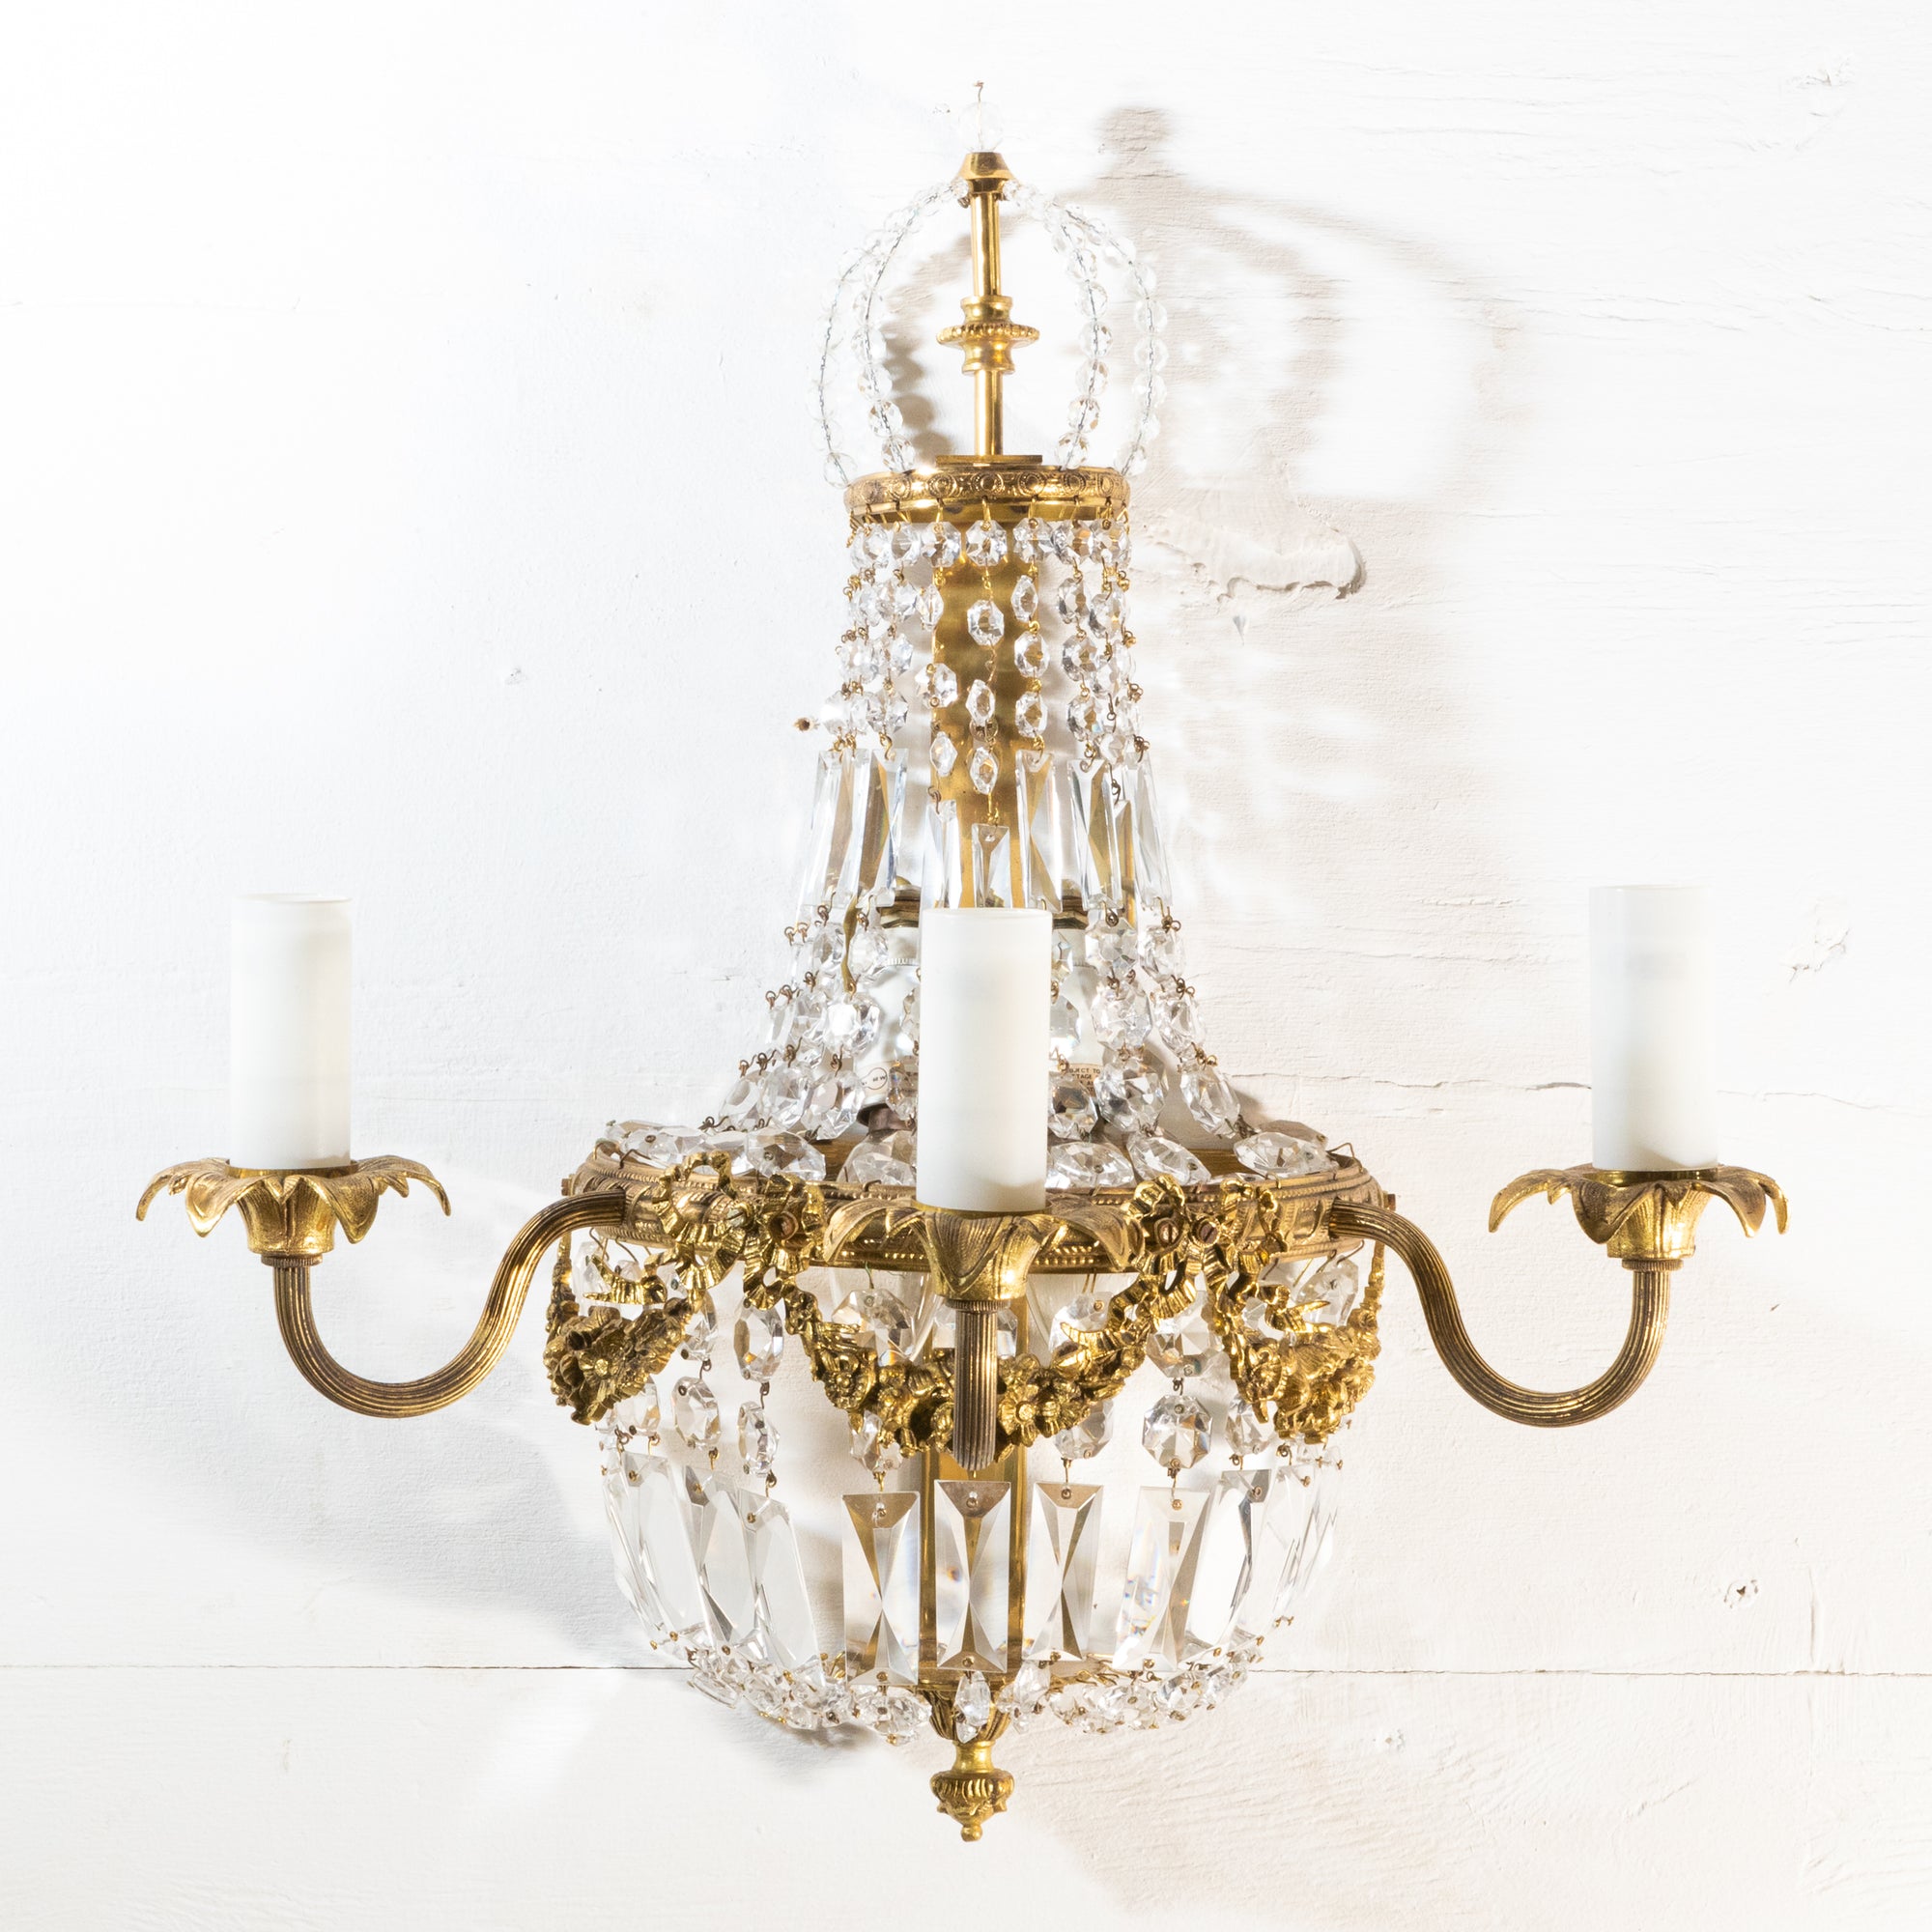 Reclaimed Brass and Crystal Chandelier Wall Light Sconces (4 Available) | The Architectural Forum